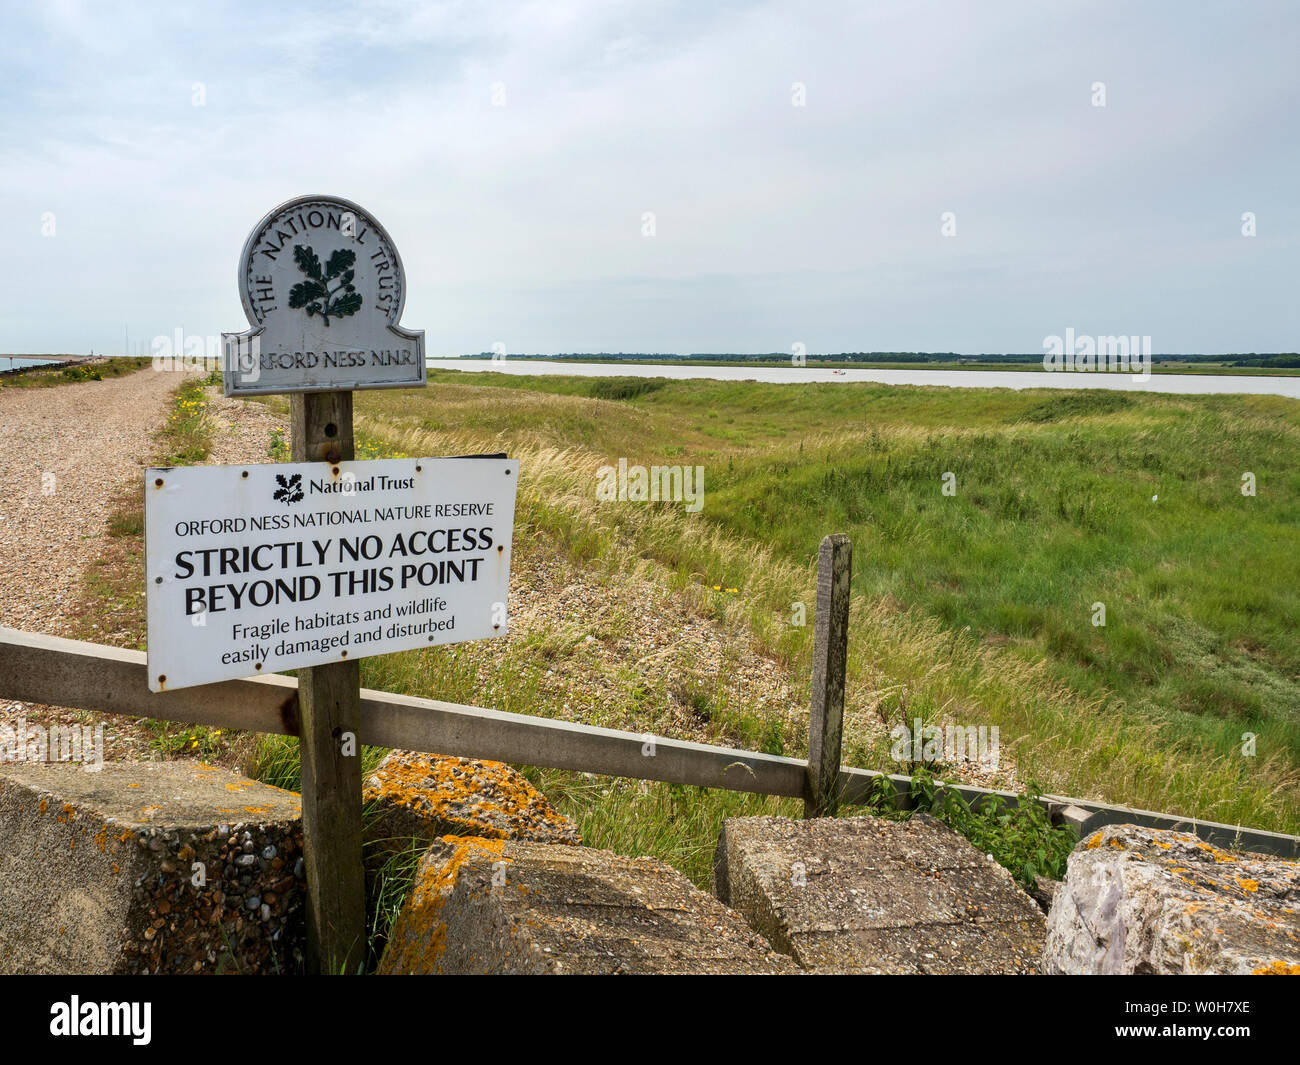 Orford Ness National Nature Reserve National Trust Strictly No Access Sign at Aldeburgh Suffolk England Stock Photo